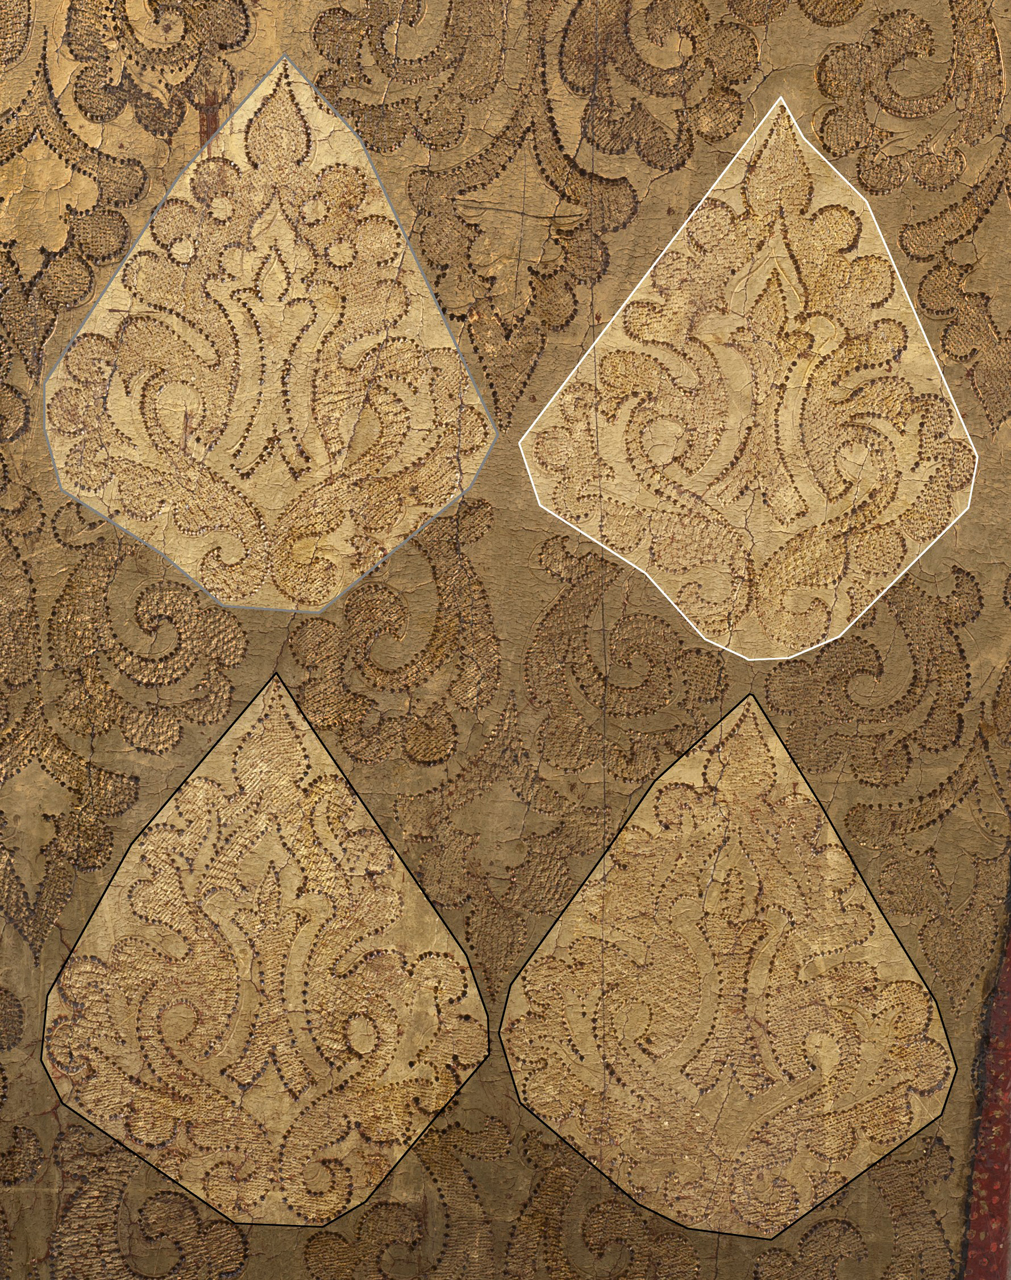 Figure 2: Photoshop-manipulated detail showing variations to brocade pattern. The grey-outlined shape has additional decorative ovals, the black-outlined shapes have additional decorative leaves, the white-outlined shape has no additional decorative elements.